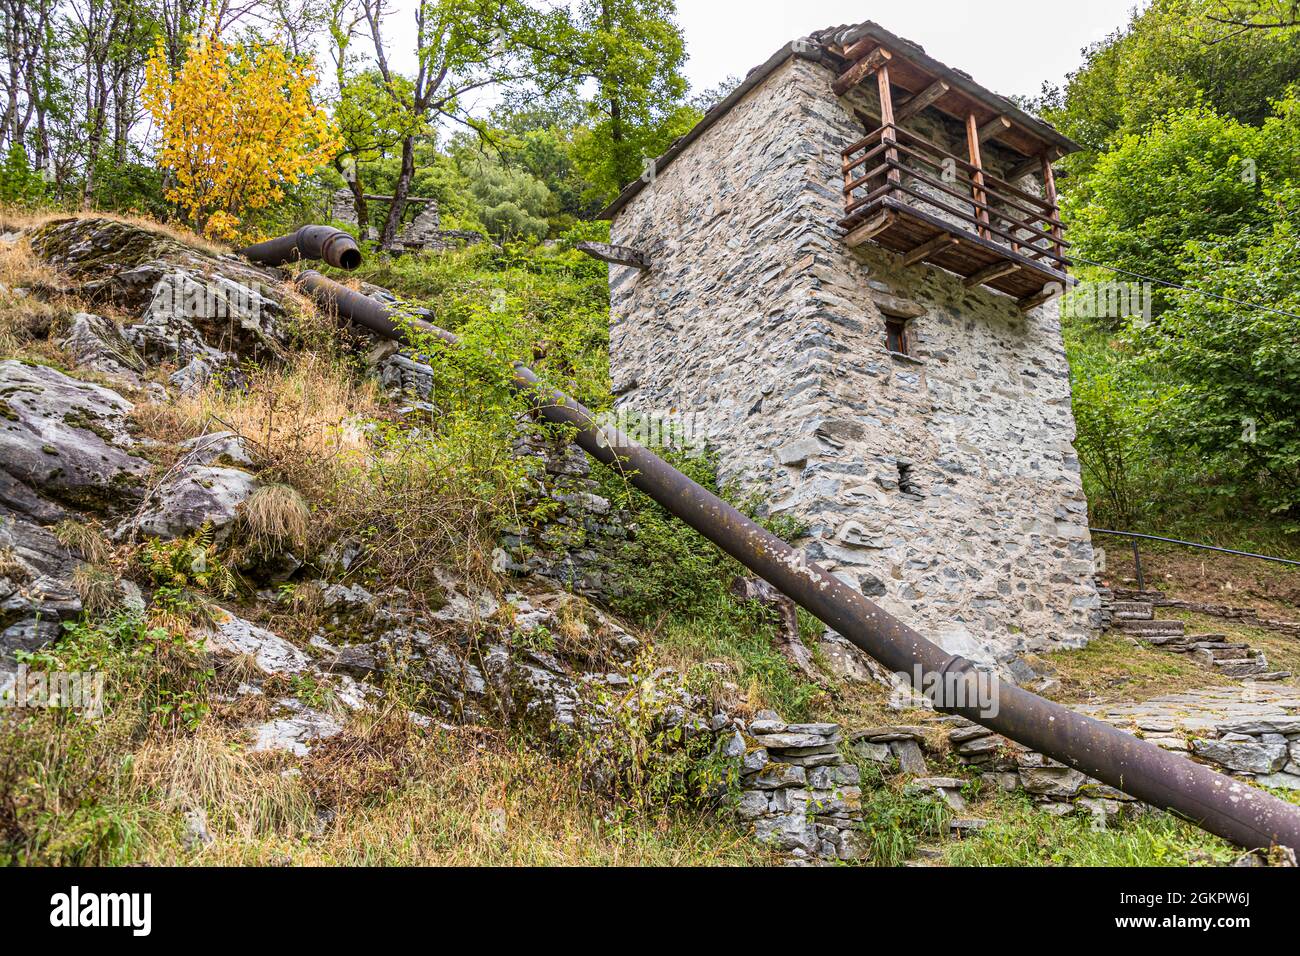 Vergeletto, with its original five mills, is something like the birthplace of the Farina bóna in Circolo d'Onsernone, Switzerland. The higher you climb up the Parco dei Mulini in Vergeletto, the worse the condition of the abandoned mills Stock Photo